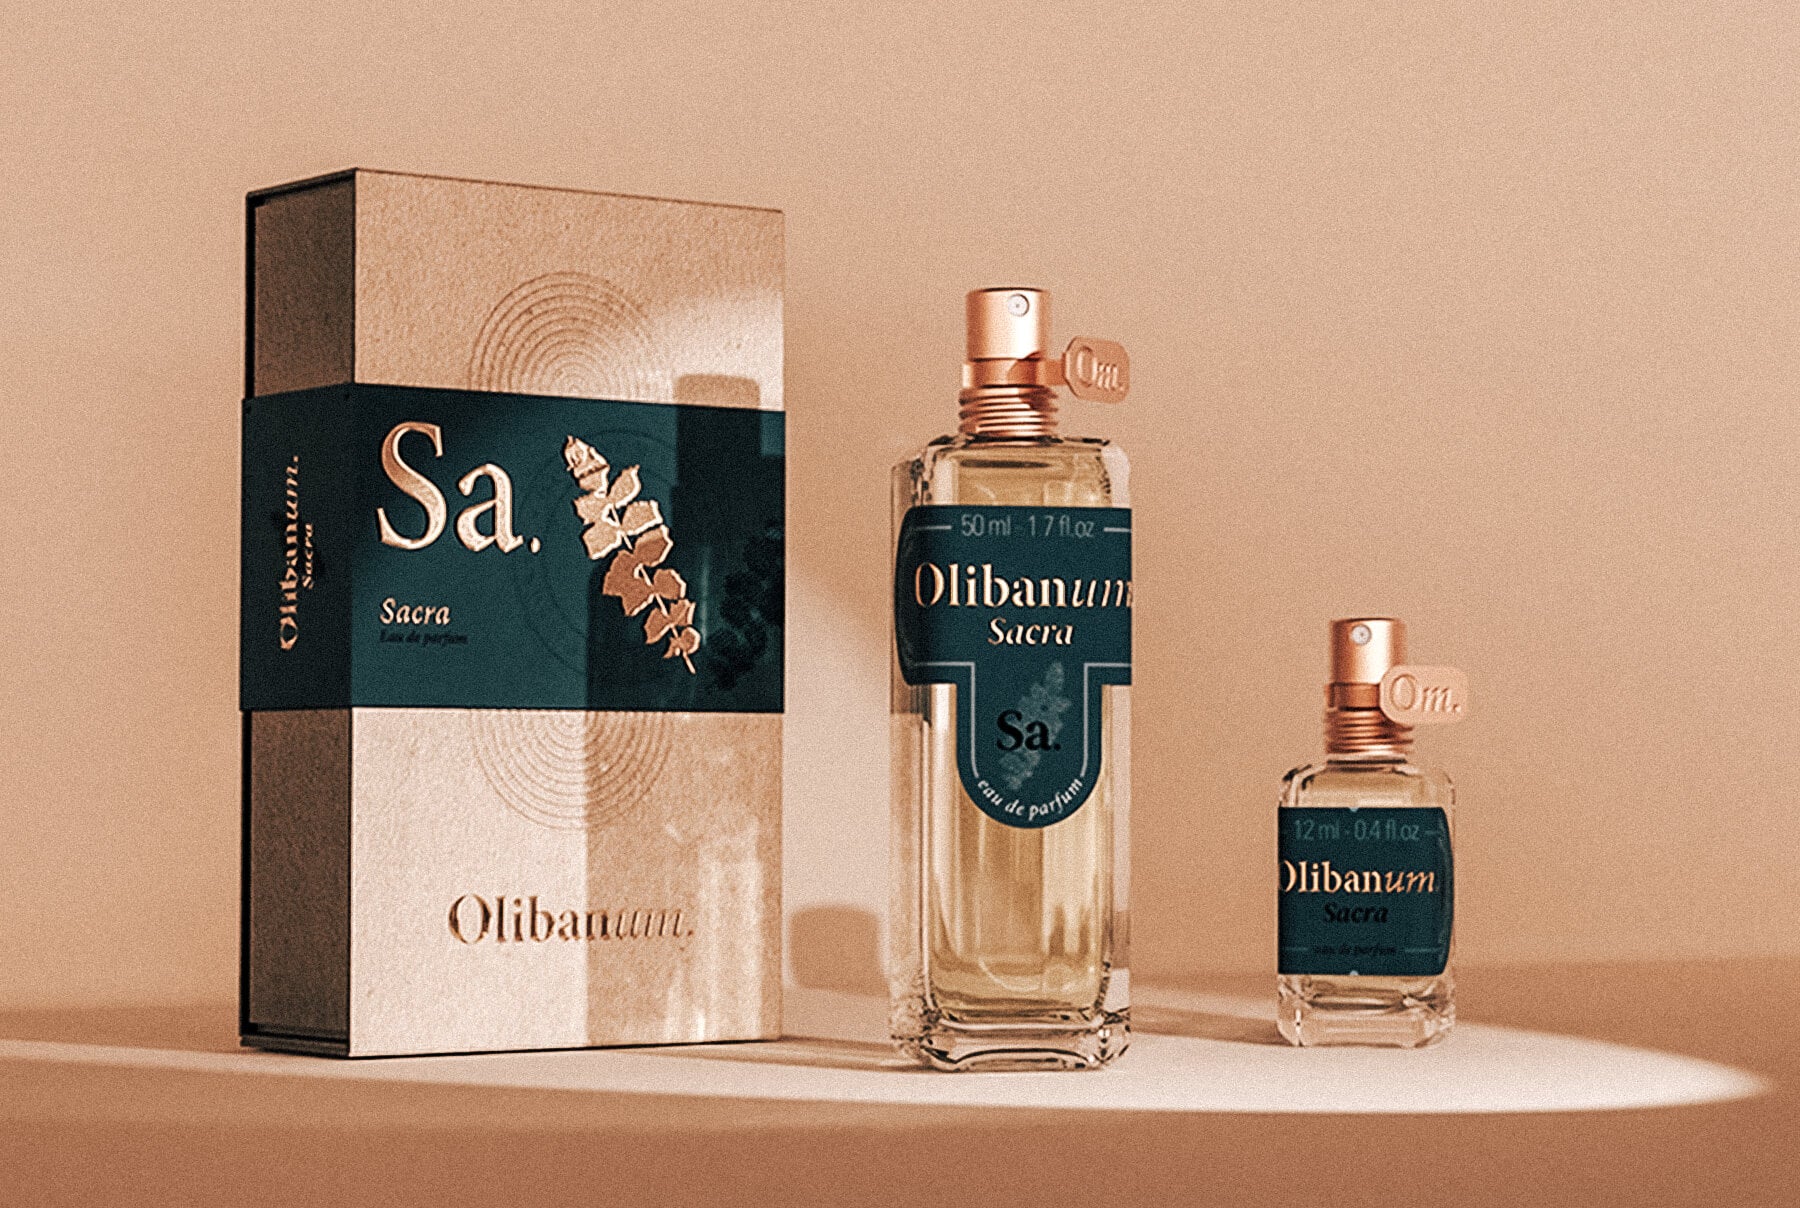 Olibanum, perfume made simple, conscious and committed.